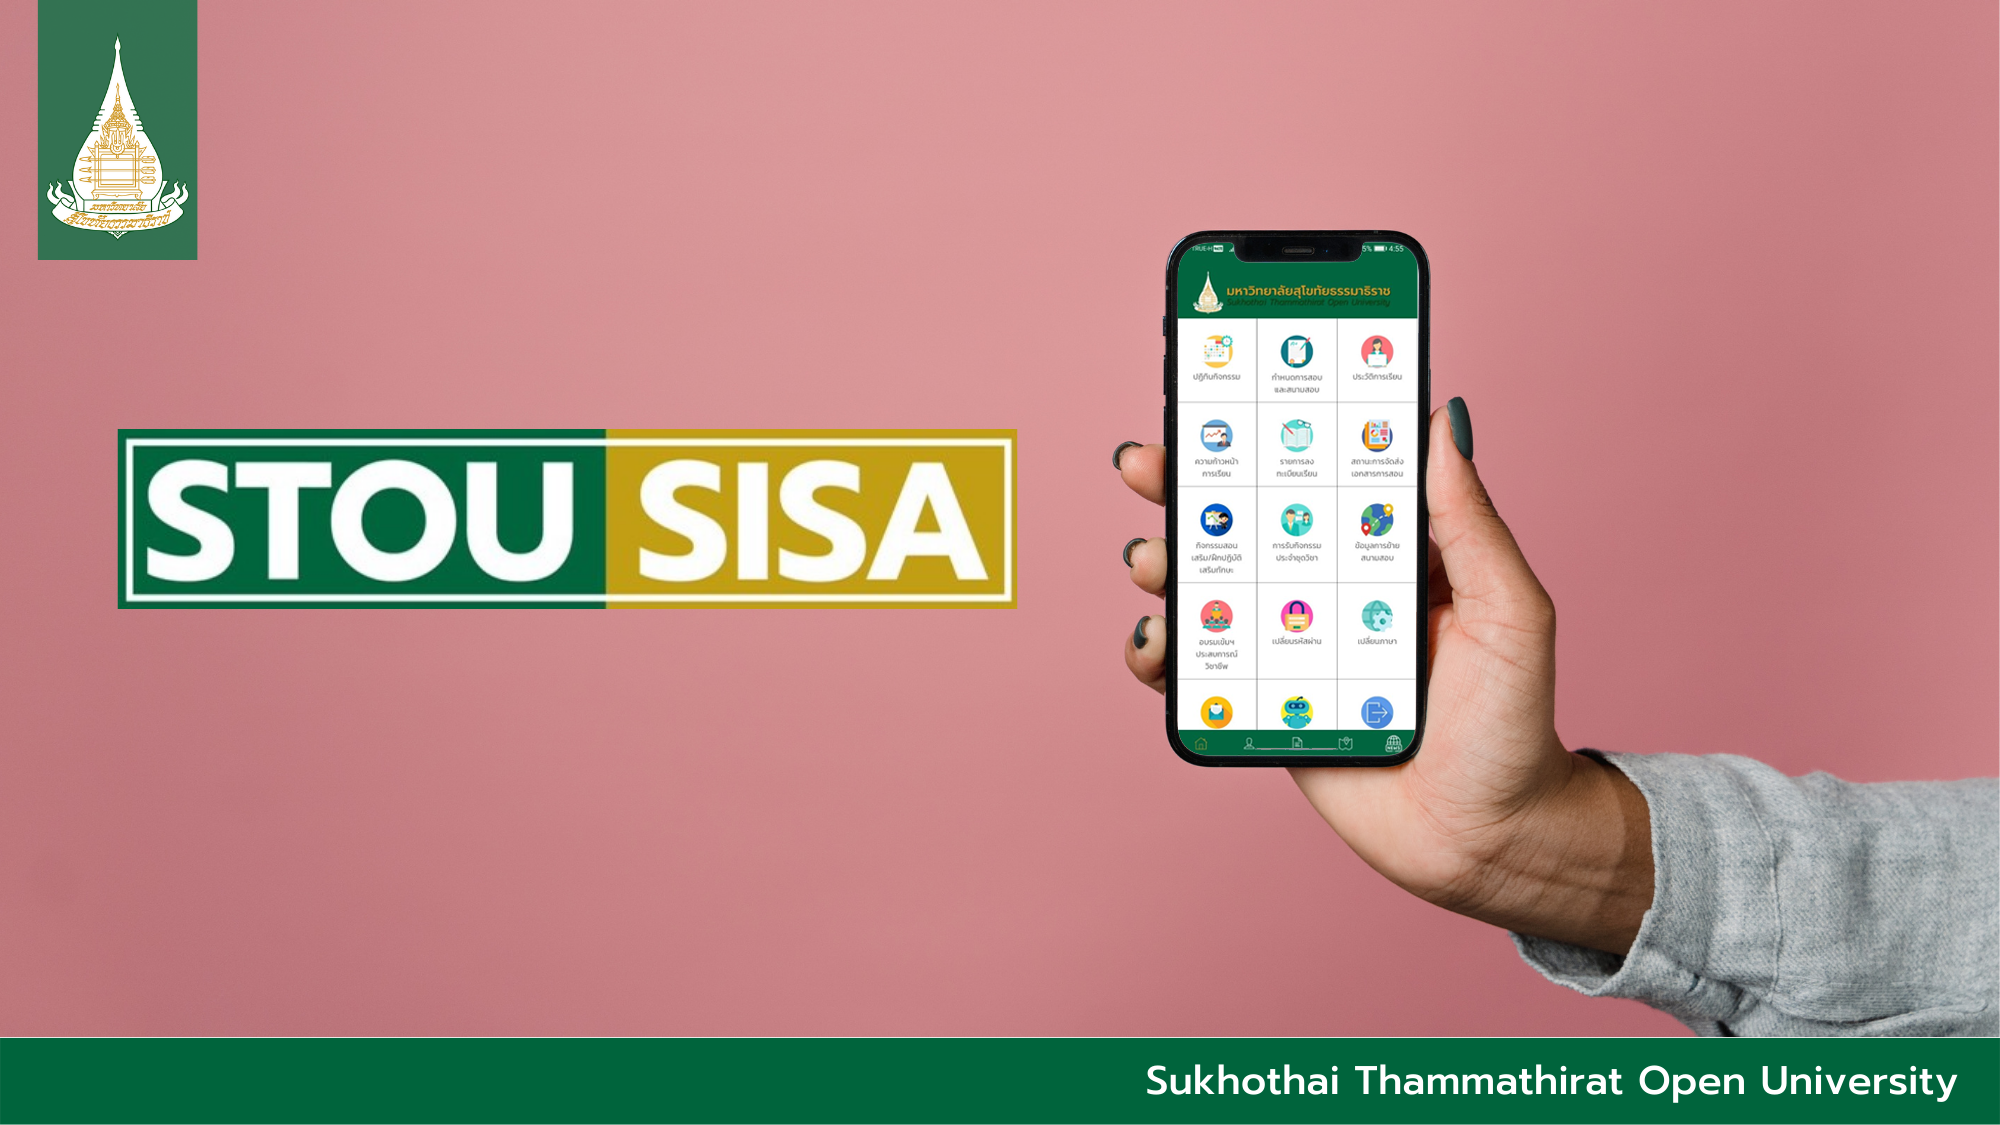 You are currently viewing “STOU SISA” App Launched